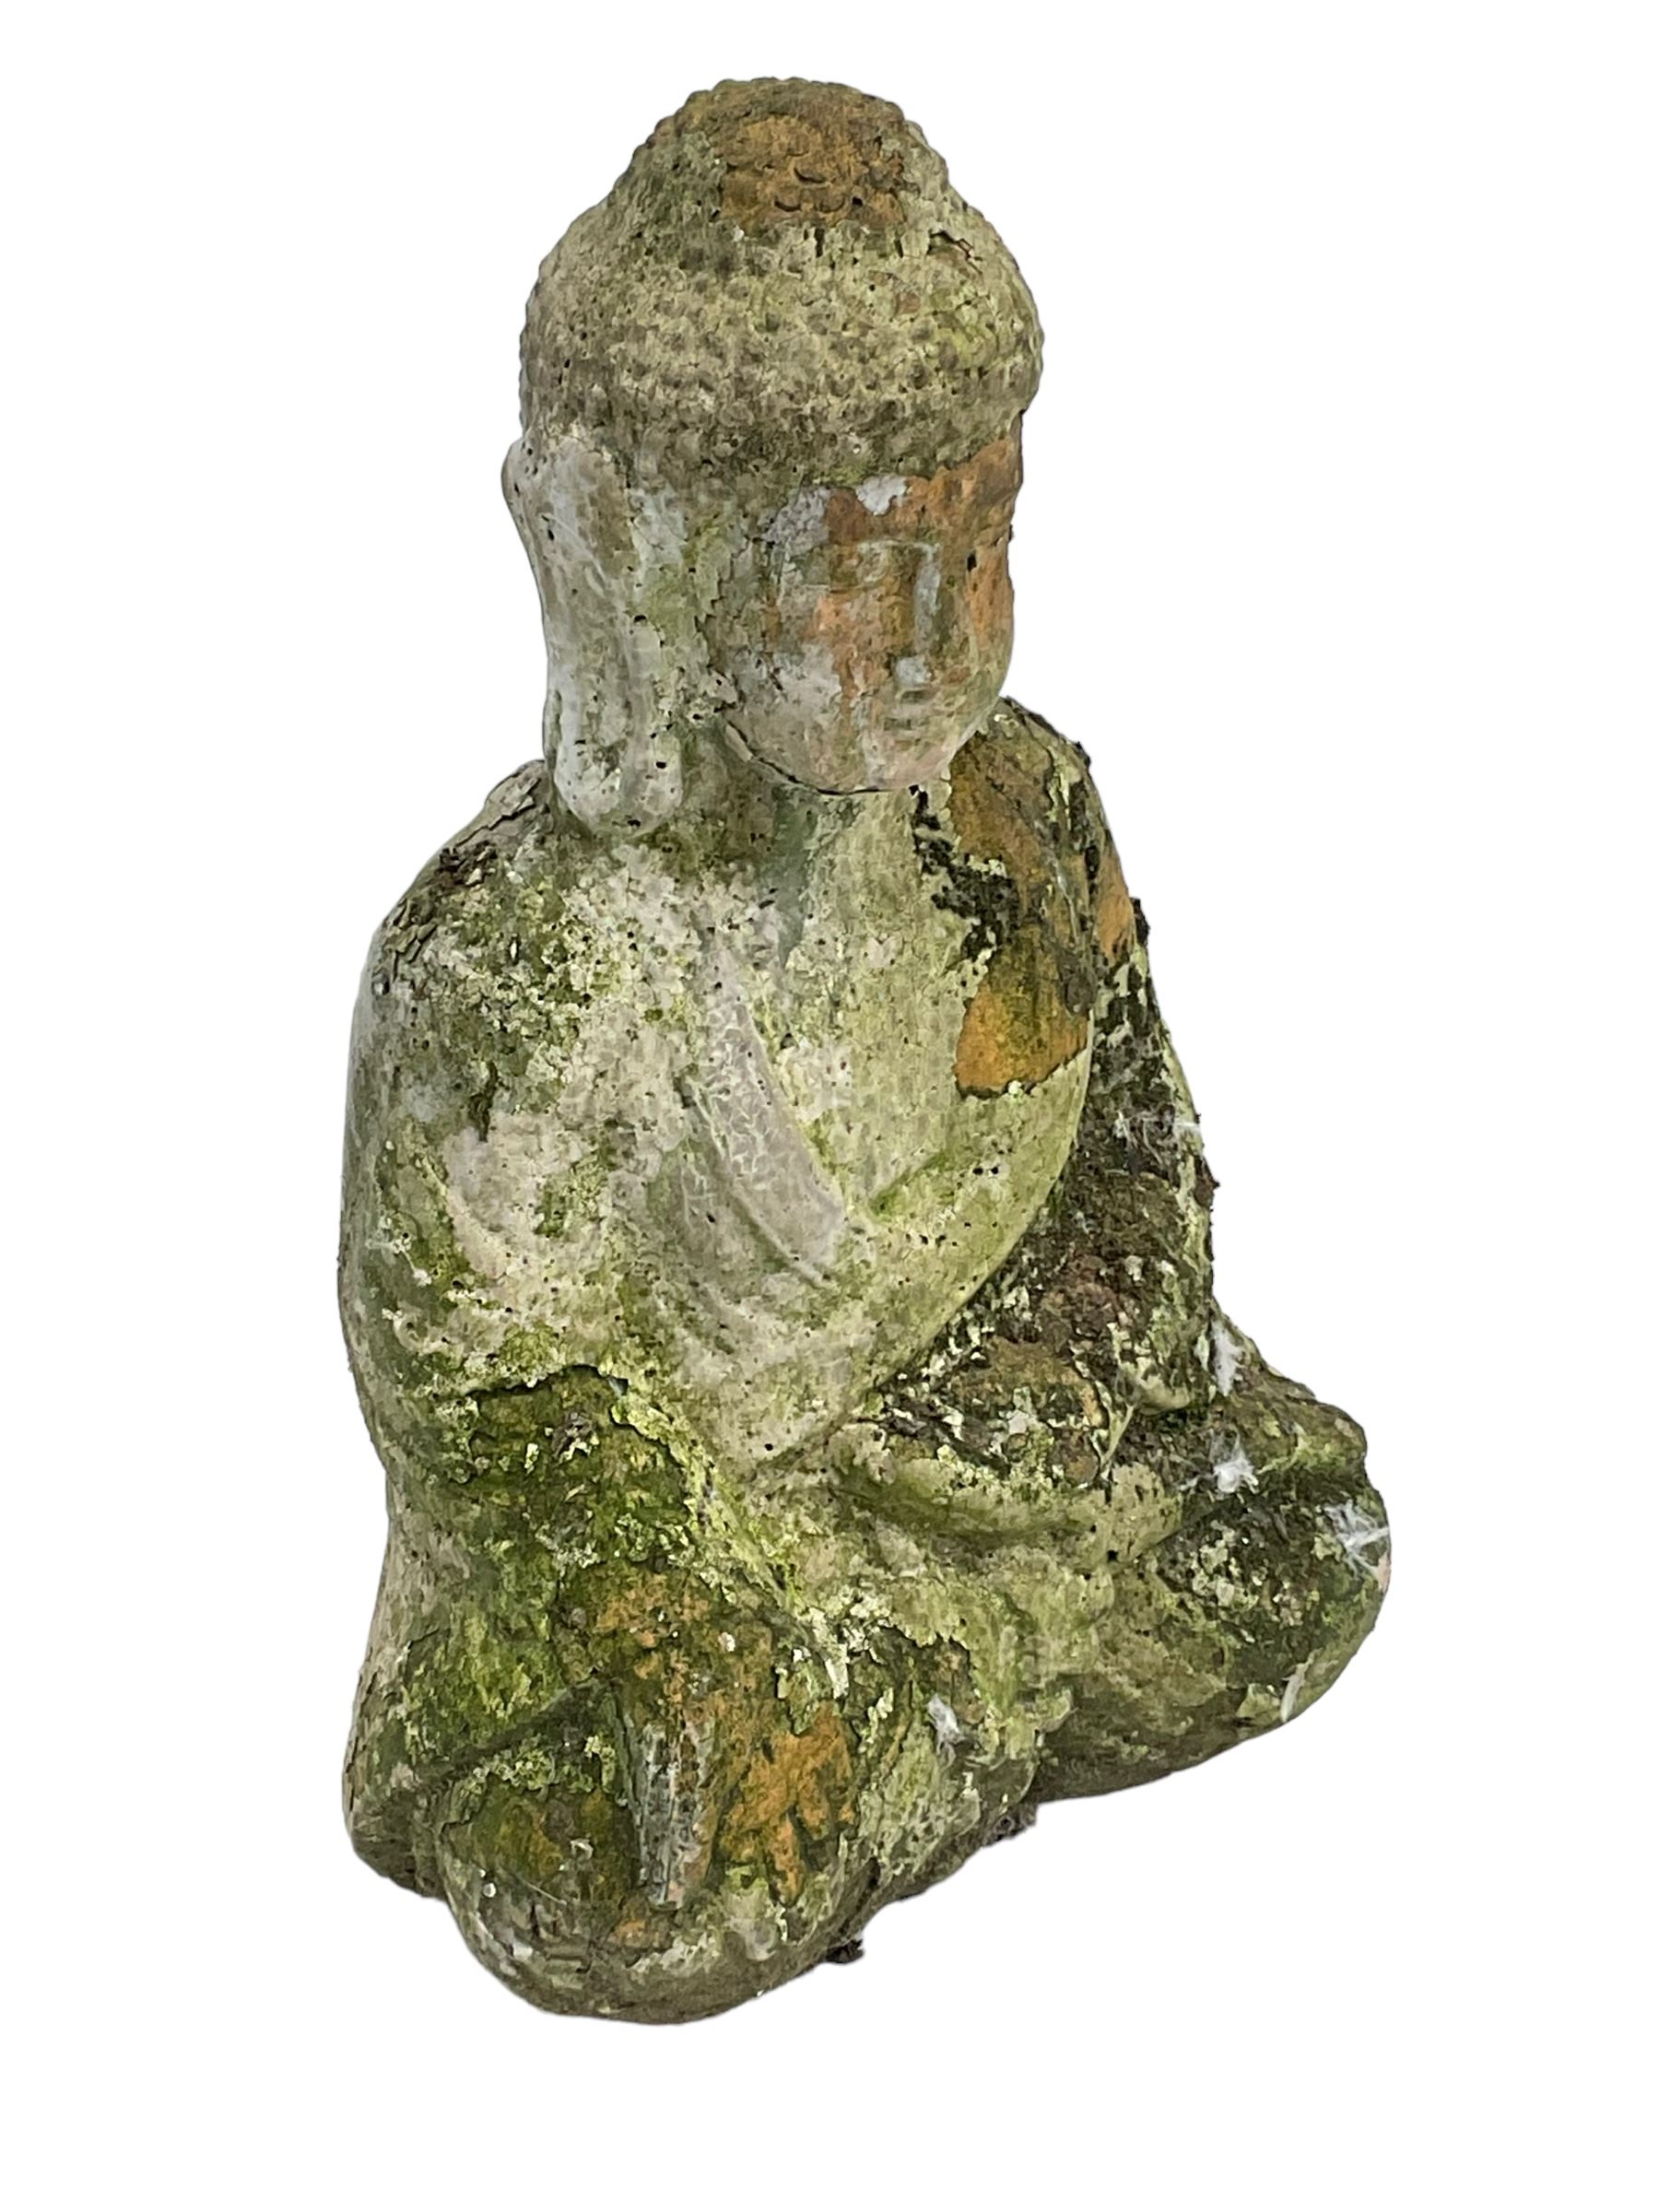 Terracotta garden figure in the form of a seated Buddha - Image 5 of 6